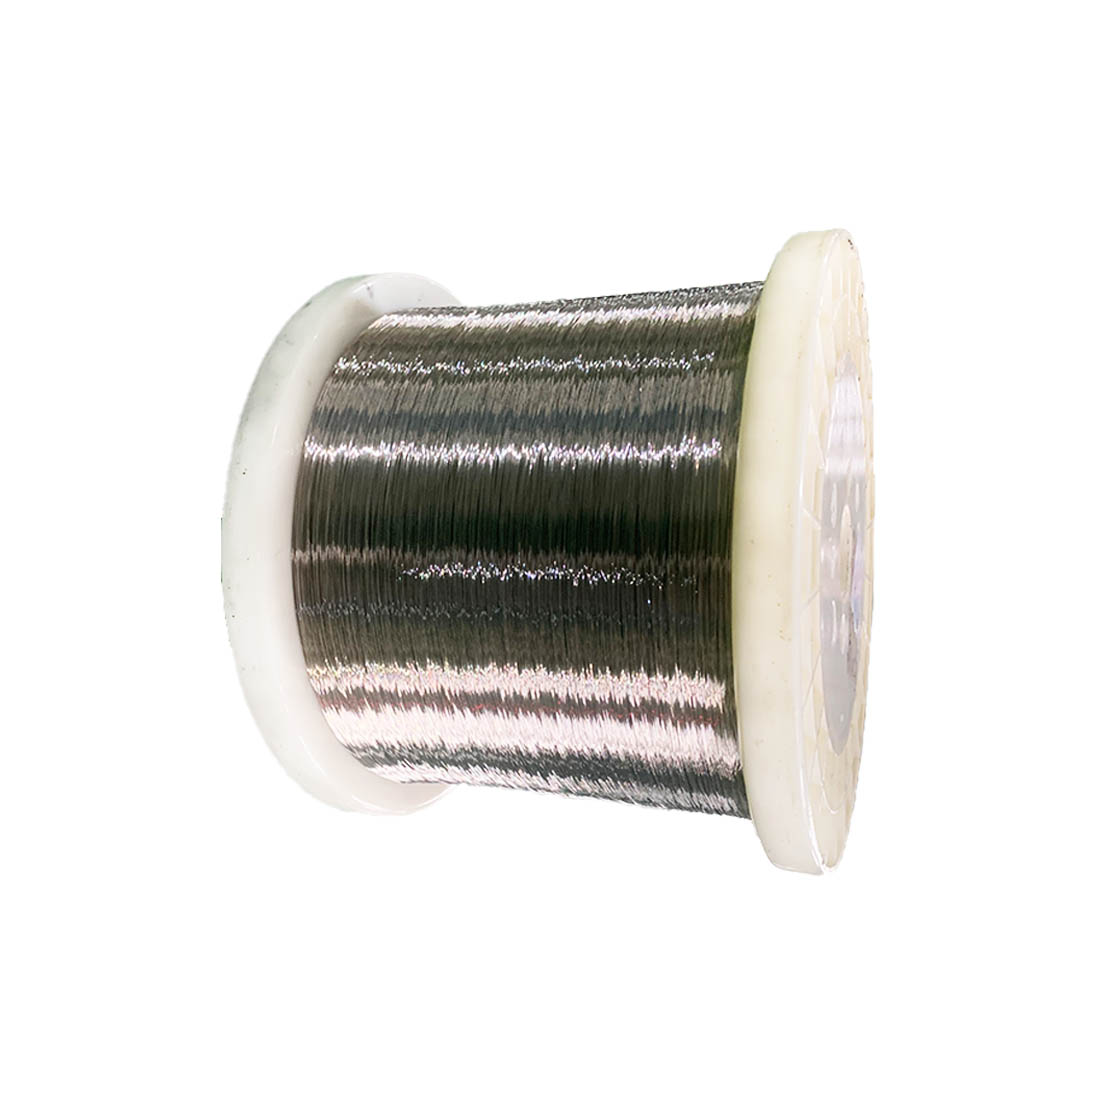 Excellent quality Soldering Nickel Plated Copper Wire Featured Image